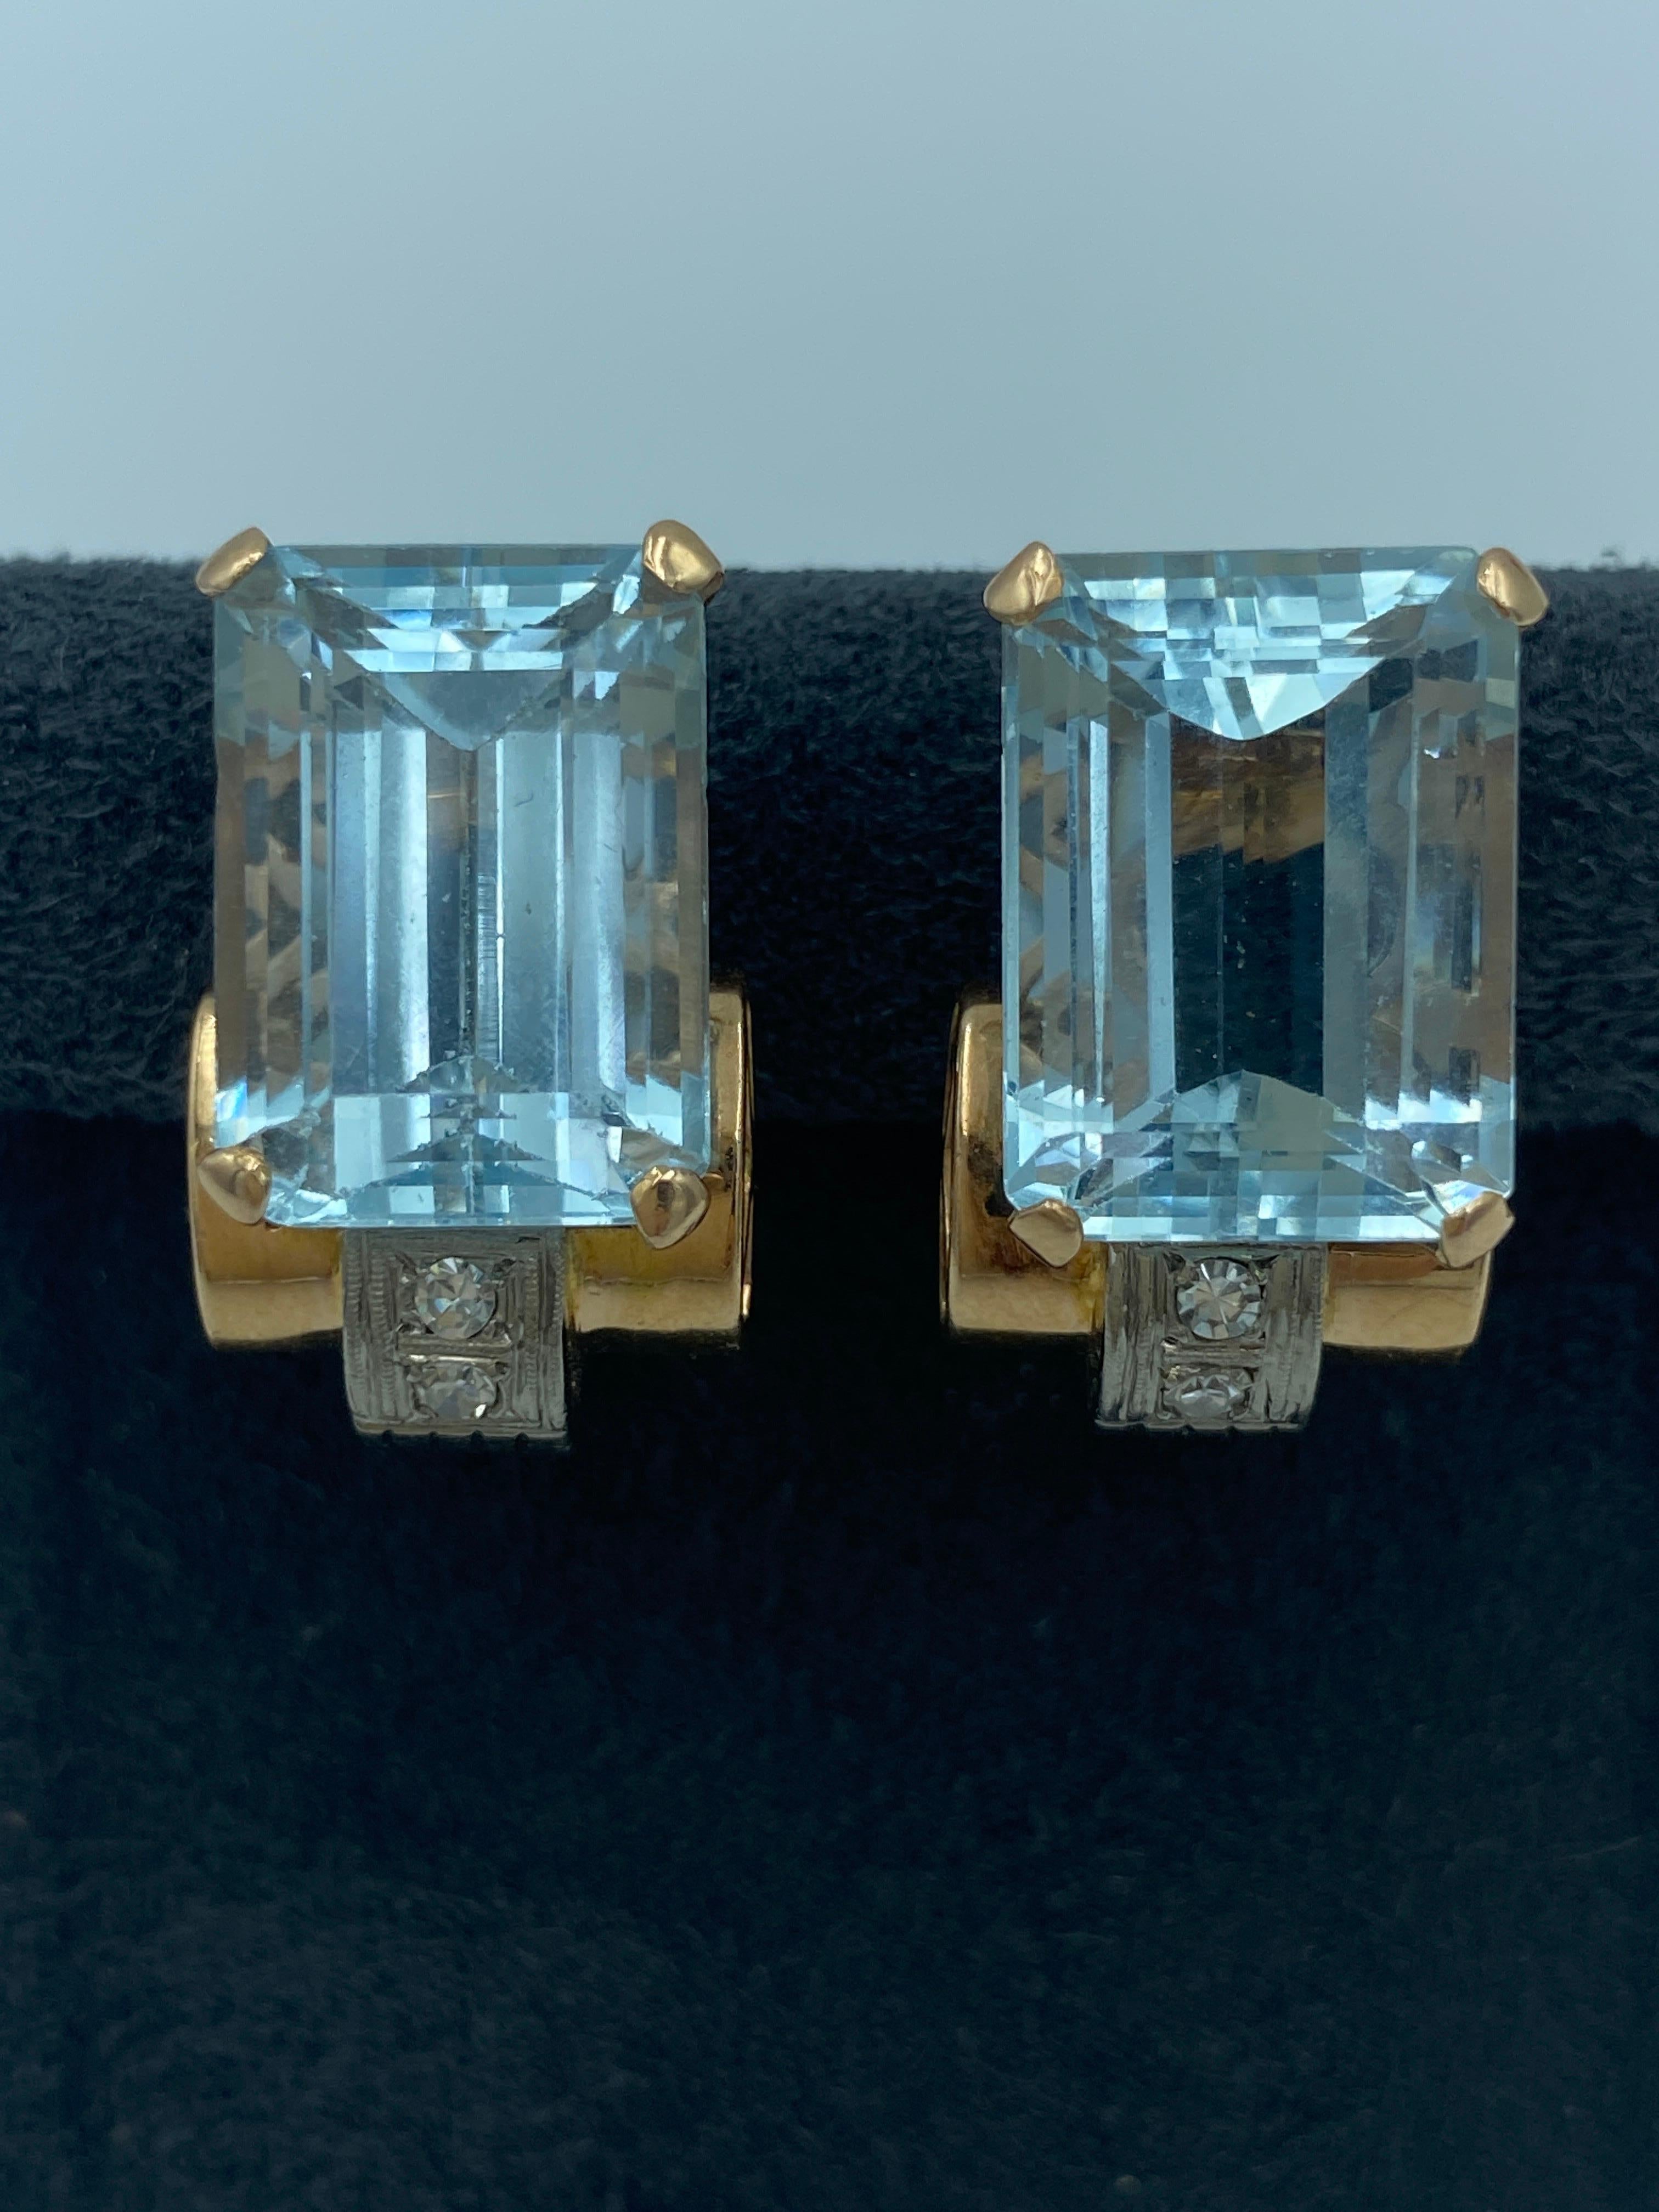 This stunning pair of 1950s French 18 carat gold earrings consist of 2 aquamarines of approximately 9.5 carats each. Each earring is adorned with 2 single cut diamonds totalling approx 0.2 carats for both.

Although they are sold separately, these